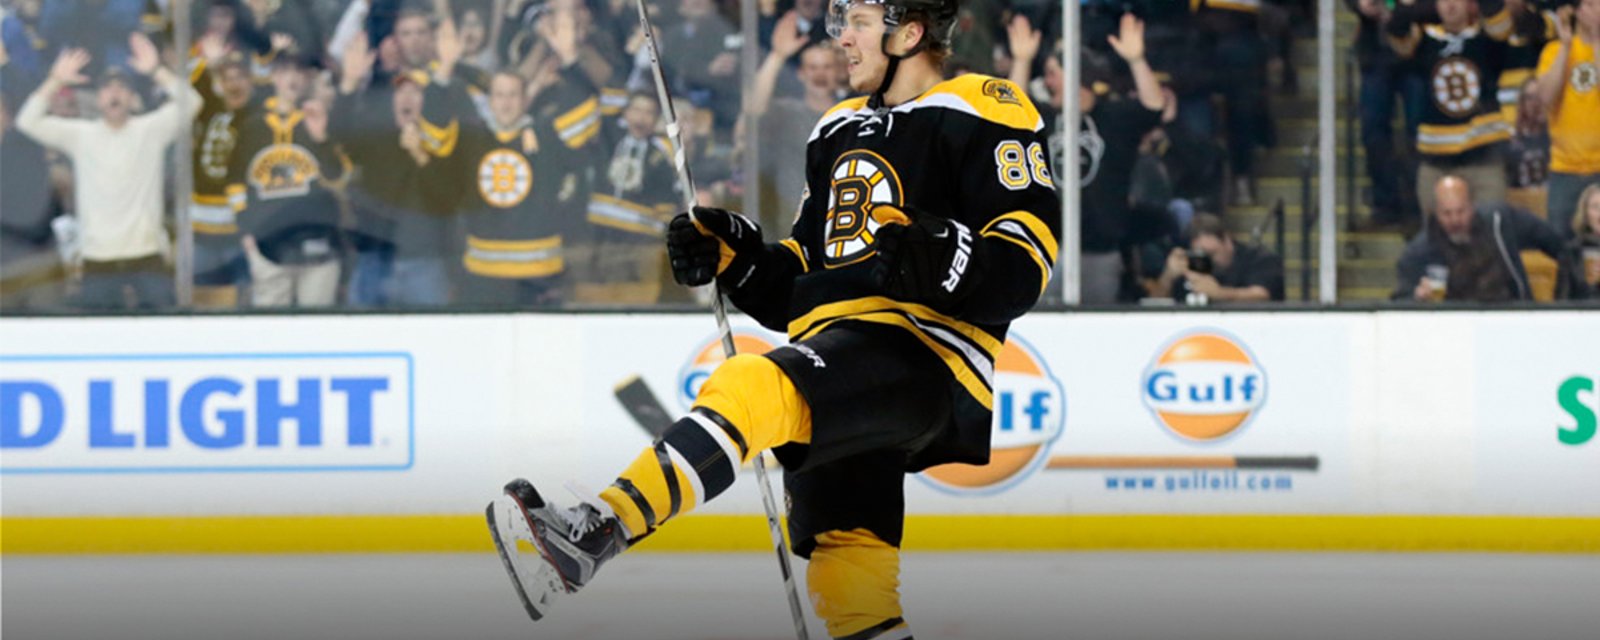 Rumor Report: Pastrnak ready to sign a new deal…. in the KHL!?